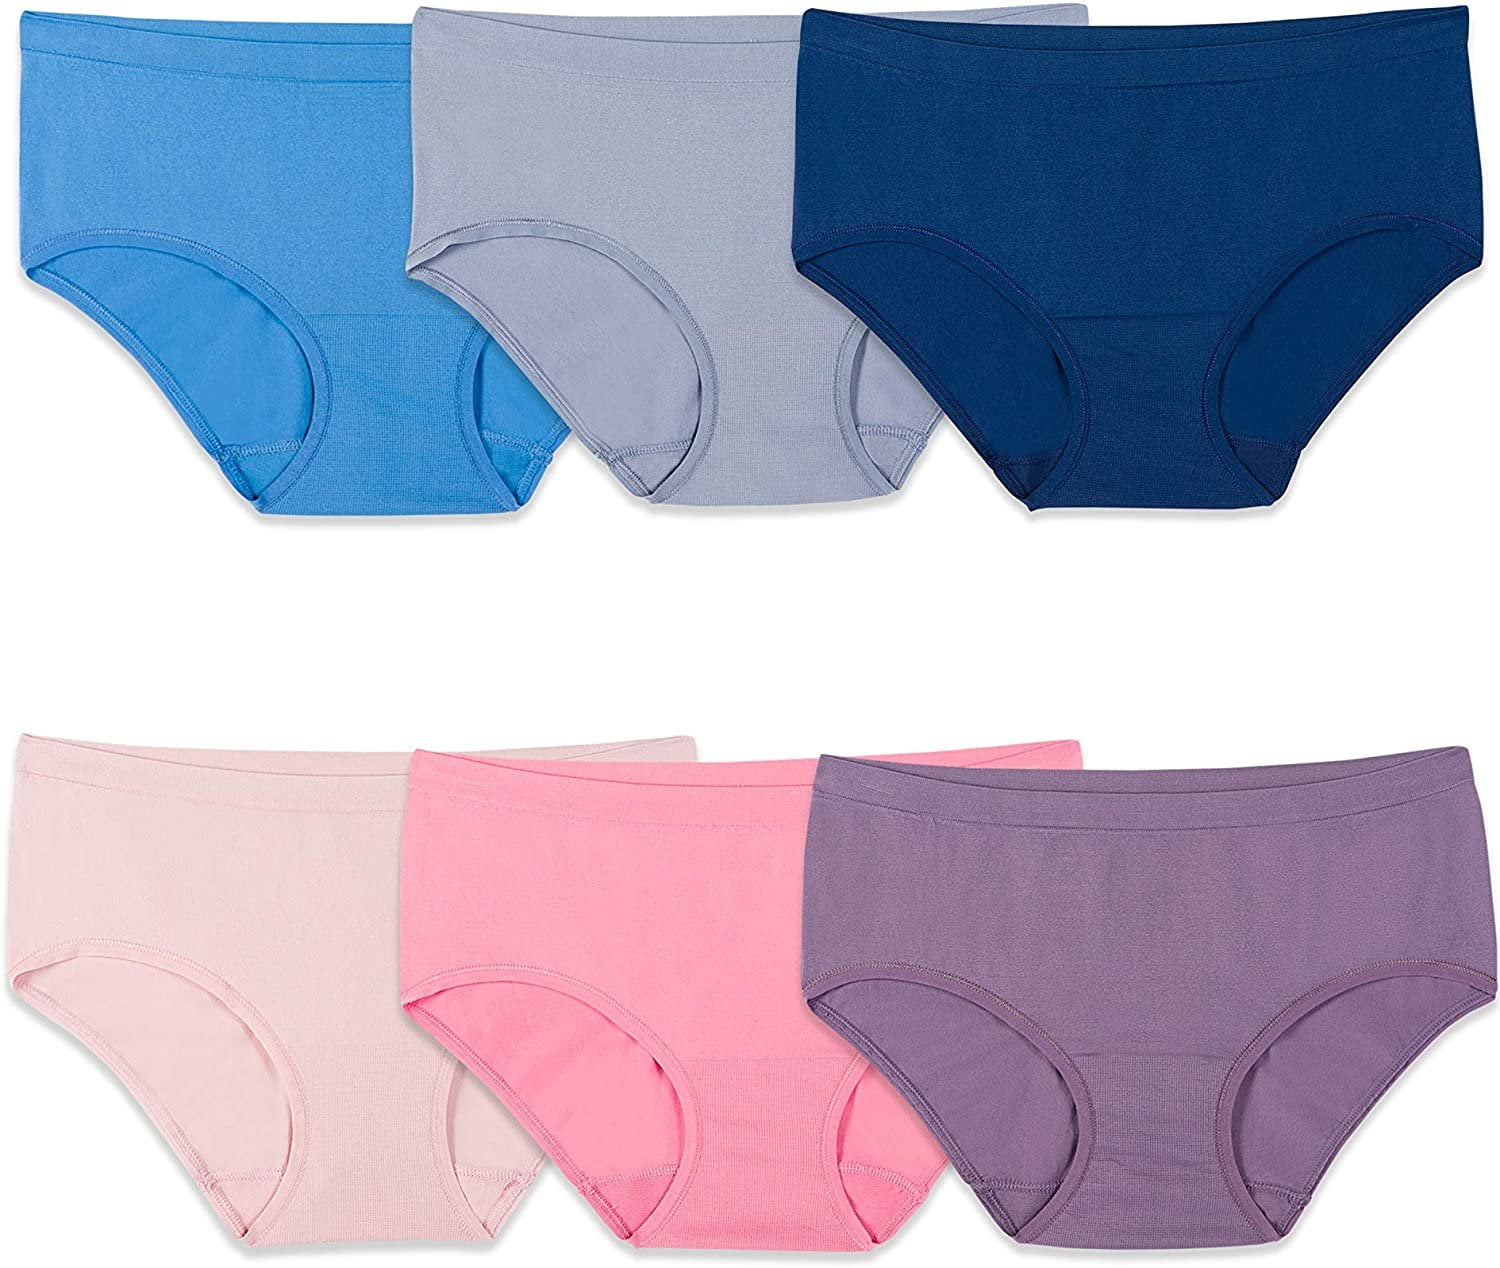 Fruit of the Loom Women's 360 Stretch Comfort Hipster Underwear, 6